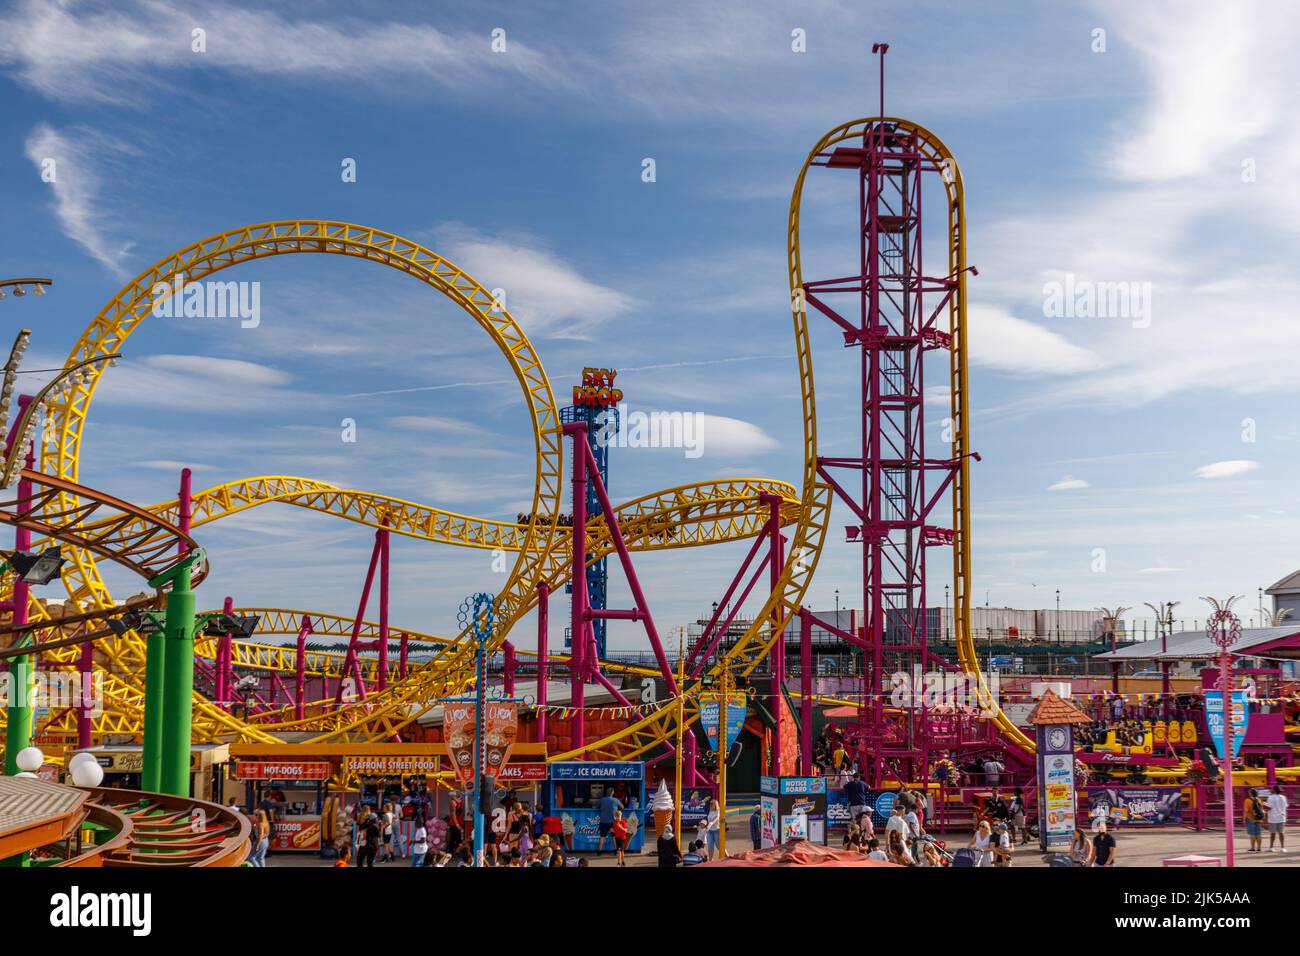 Adventure Island Amusement Park and Roller coaster tracks on a sunny day in England Stock Photo